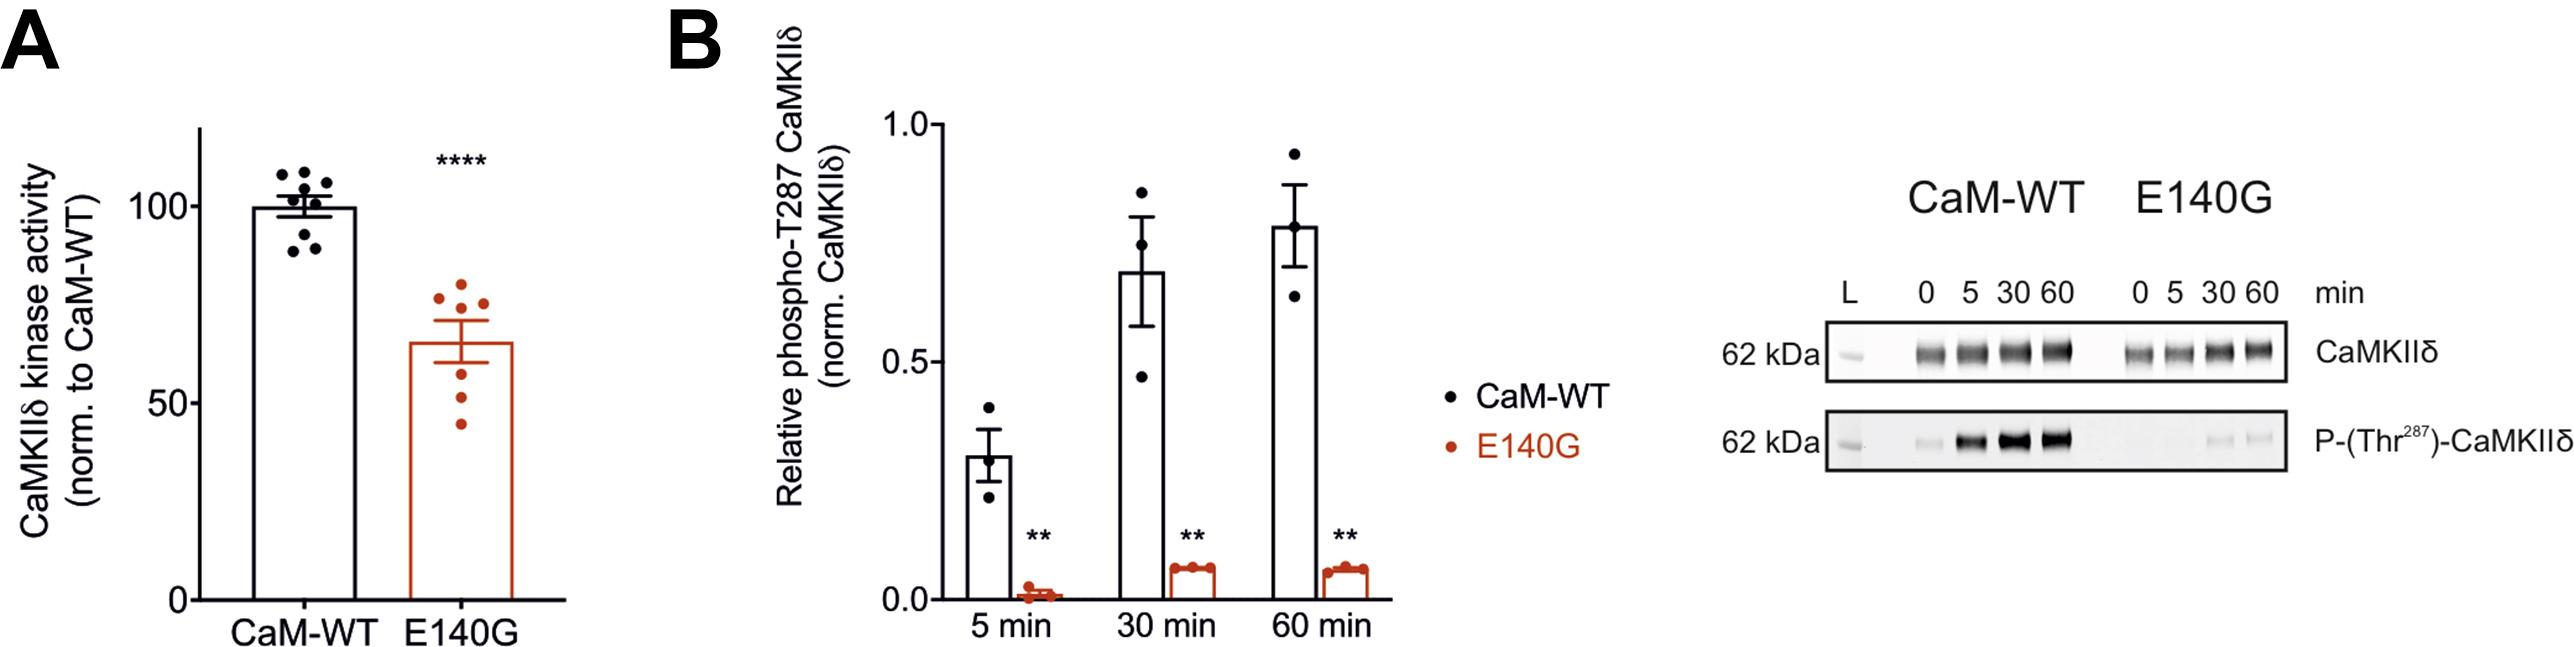 Arrhythmic variant CaM-E140G decreases kinase activity and autophosphorylation of CaMKIIδ. A, quantification of phosphorylation activity of CaMKIIδ using Amplite universal fluorimetric kinase assay kit. (B-left panel), measurement of the relative levels of CaMKIIδ Thr287 autophosphorylation. GST-CaMKIIδ was incubated with CaM variants and ATP for 0 min, 5 min, 15 min, 30 min, and 60 min at room temperature. CaM-WT or CaM-E140G recombinant proteins were used as CaMKIIδ activators. The reaction was terminated using SDS-containing solution, and samples were analyzed by Western blotting and densitometry analysis. (B-right panel), representative blots for CaM-WT and CaM-E140G samples. Phosphorylated proteins (phospho-Thr287 antibody) were normalized to total CaMKIIδ protein (GST antibody). Experiments were performed at least in triplicates. Data are expressed as mean ± s.e.m. Differences between groups were determined using a two-tailed unpaired Student t test. p-values are represented by stars with ∗∗p < 0.01 and ∗∗∗∗p < 0.0001. CaM, calmodulin. Source: <b>Calmodulin variant E140G associated with long QT syndrome impairs CaMKIIδ autophosphorylation and L-type calcium channel inactivation</b>  by Ohm Prakash, Nitika Gupta, Amy Milburn, Liam McCormick, Vishvangi Deugi, Pauline Fisch, Jacob Wyles, N Lowri Thomas, Svetlana Antonyuk, Caroline Dart, and Nordine Helassa. <em>Journal of Biological Chemistry</em>, January 2023.
